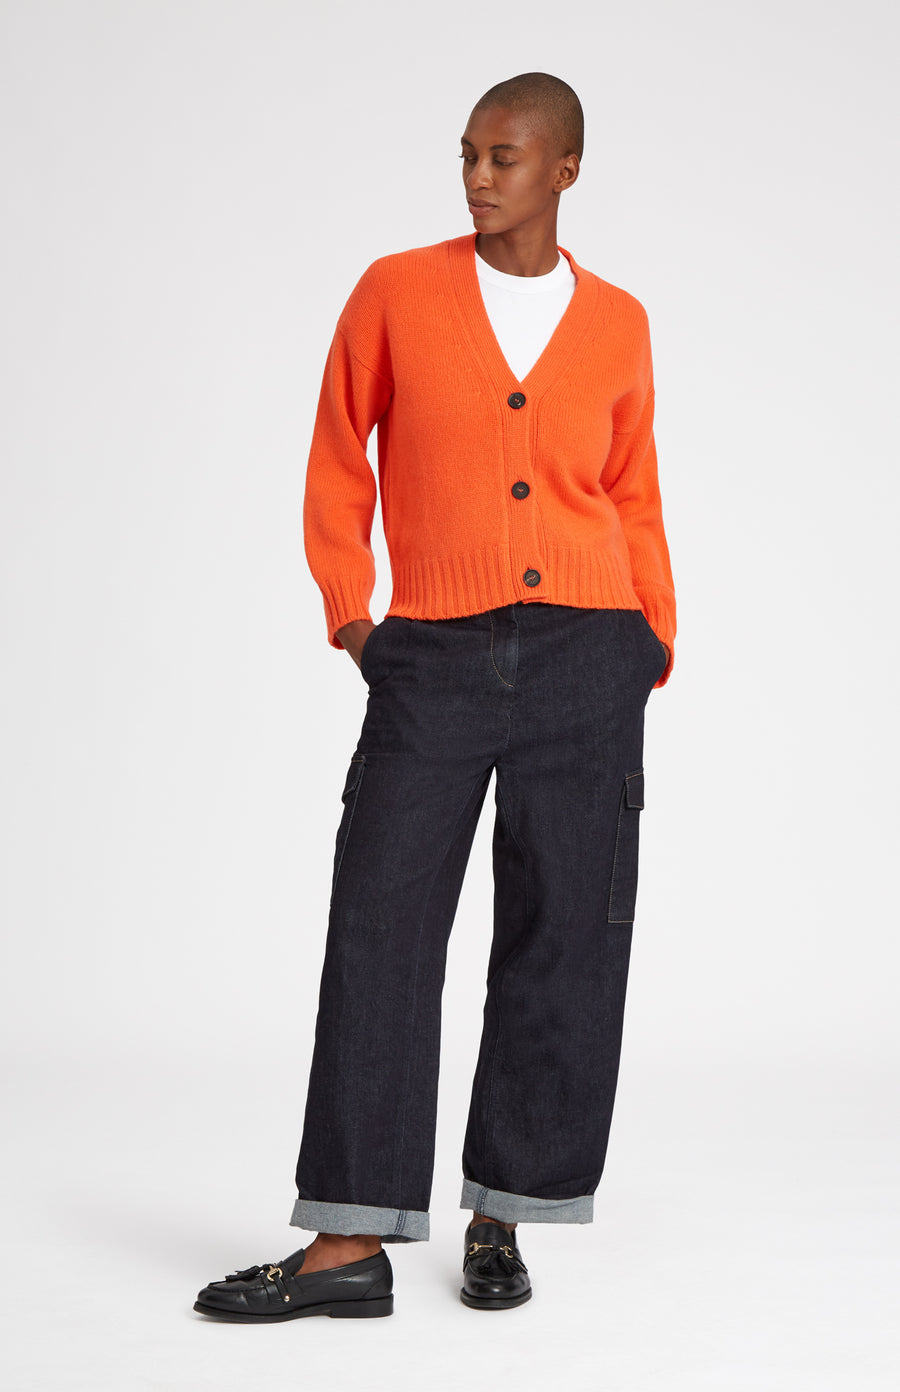 Women's Cropped Cosy Cashmere Cardigan In Apricot Orange on model full length - Pringle of Scotland